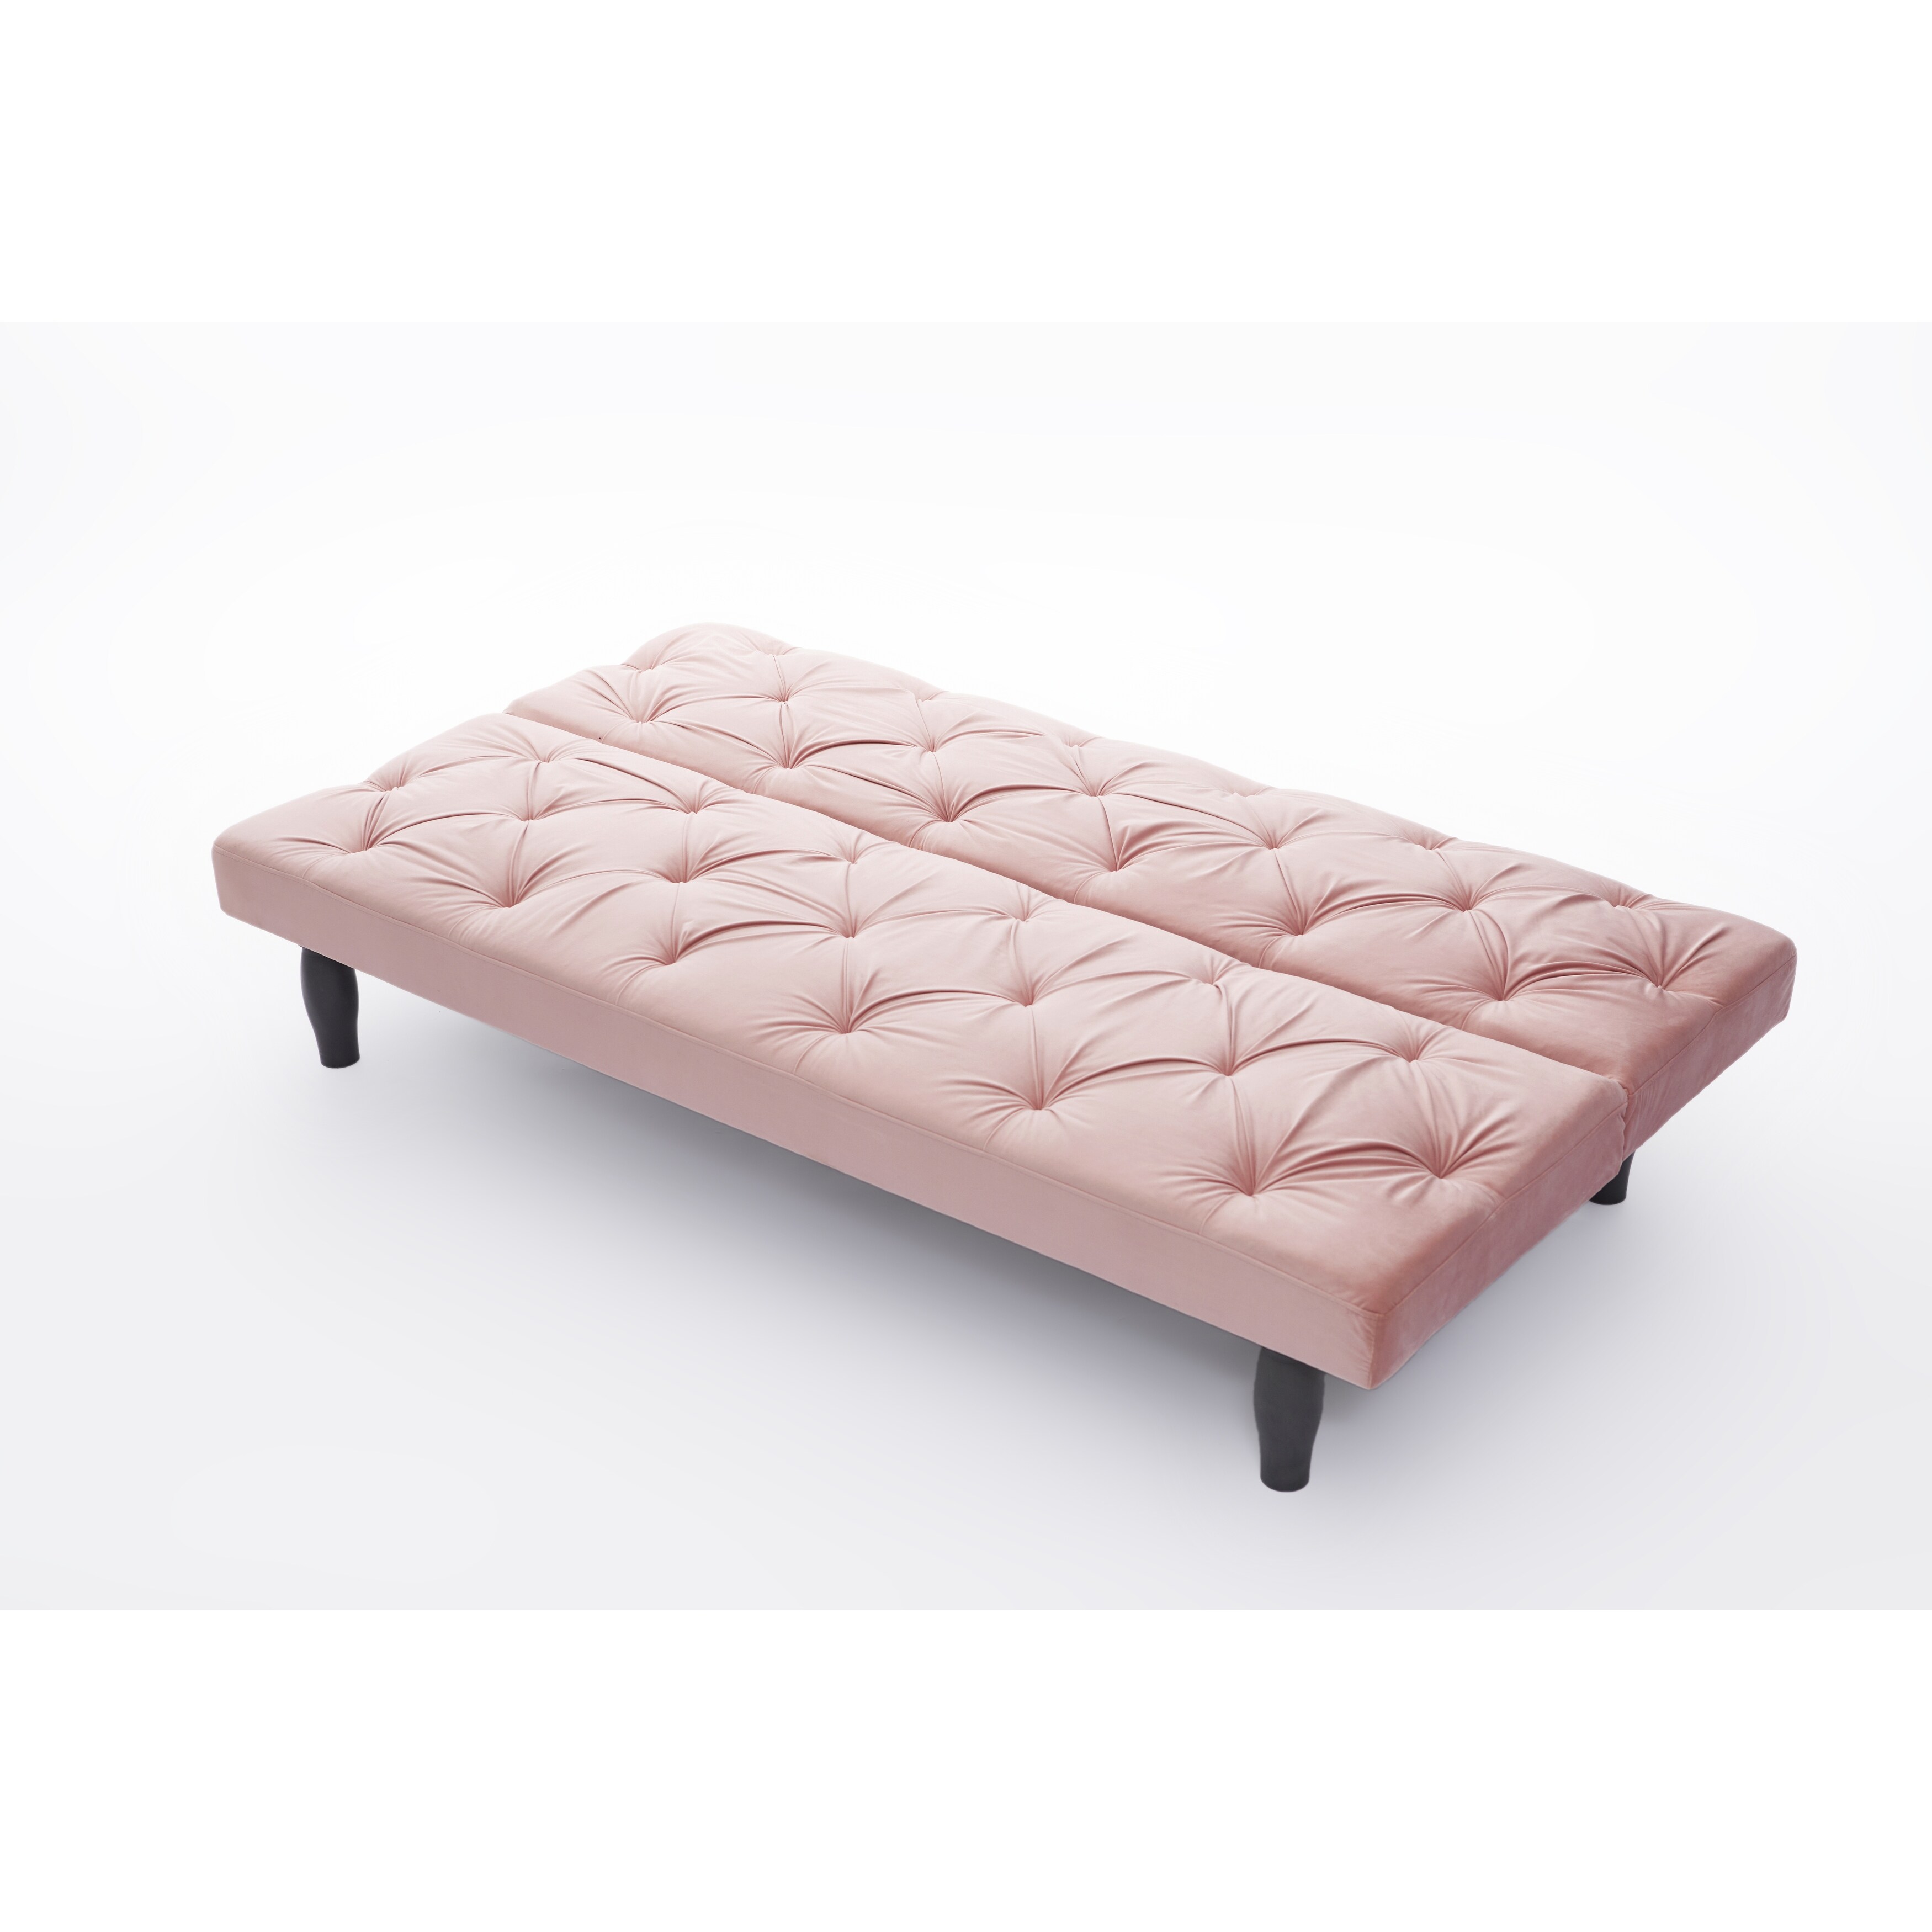 Velvet Futon Sofa with Adjustable Tufted Back, Converts into Bed